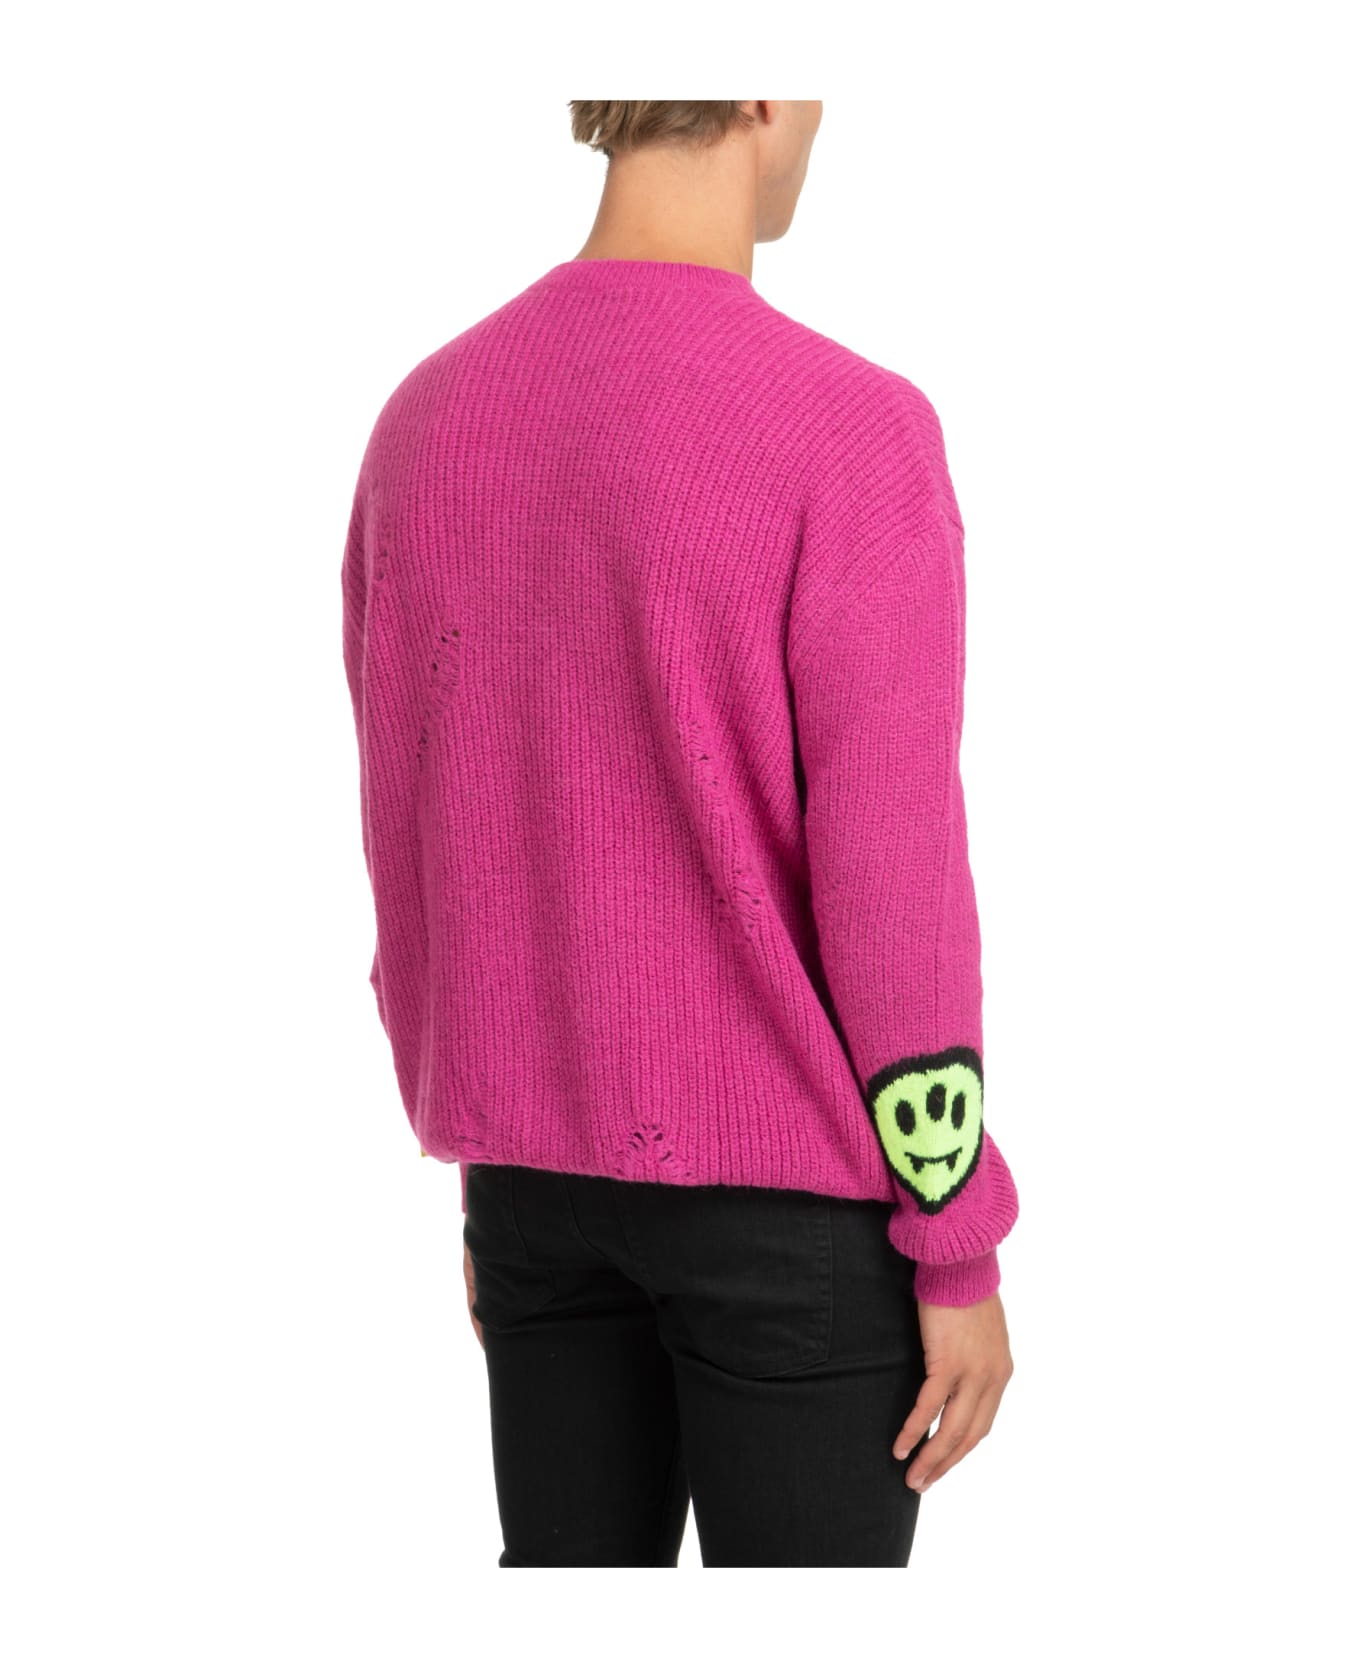 Barrow Sweater - Rose Violet name:475